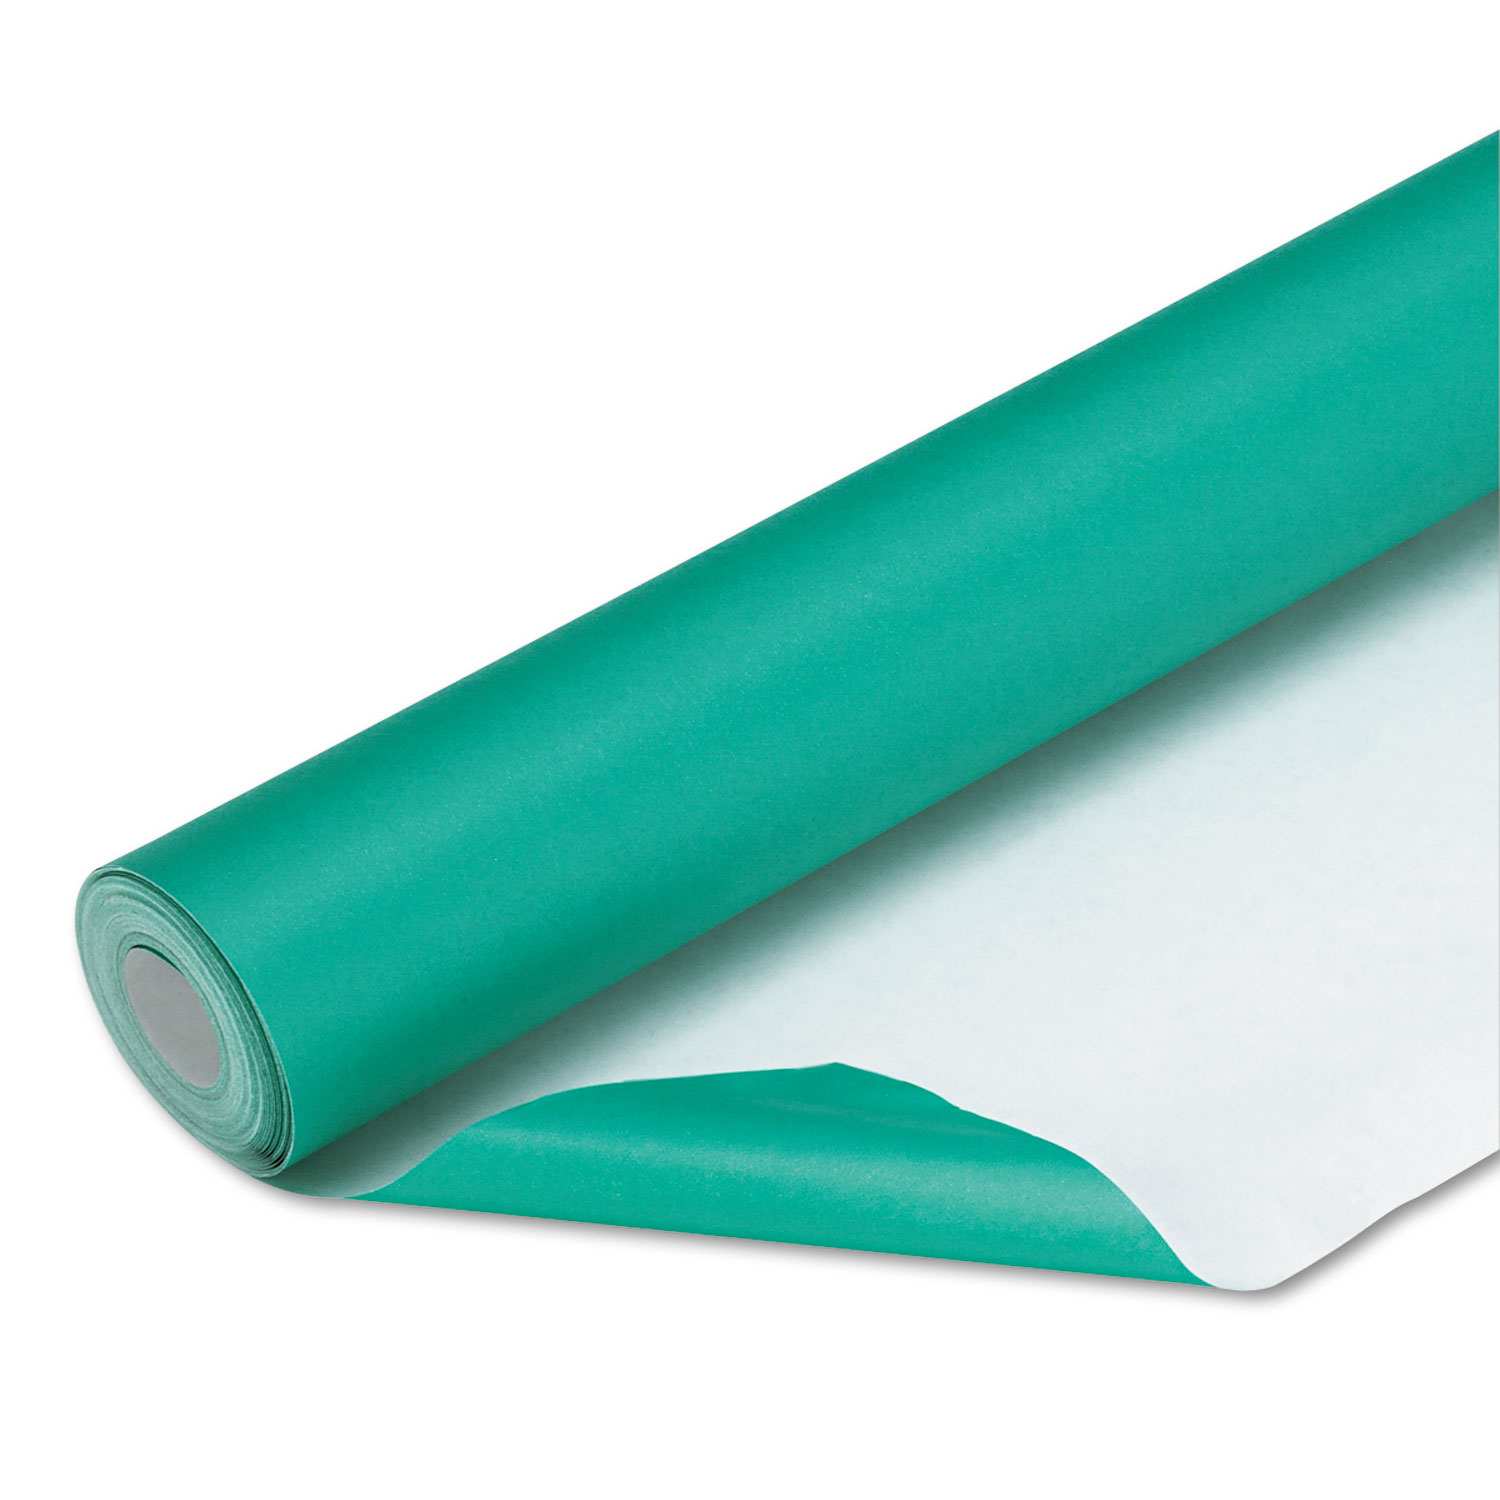  Pacon 57195 Fadeless Paper Roll, 50lb, 48 x 50ft, Teal (PAC57195) 